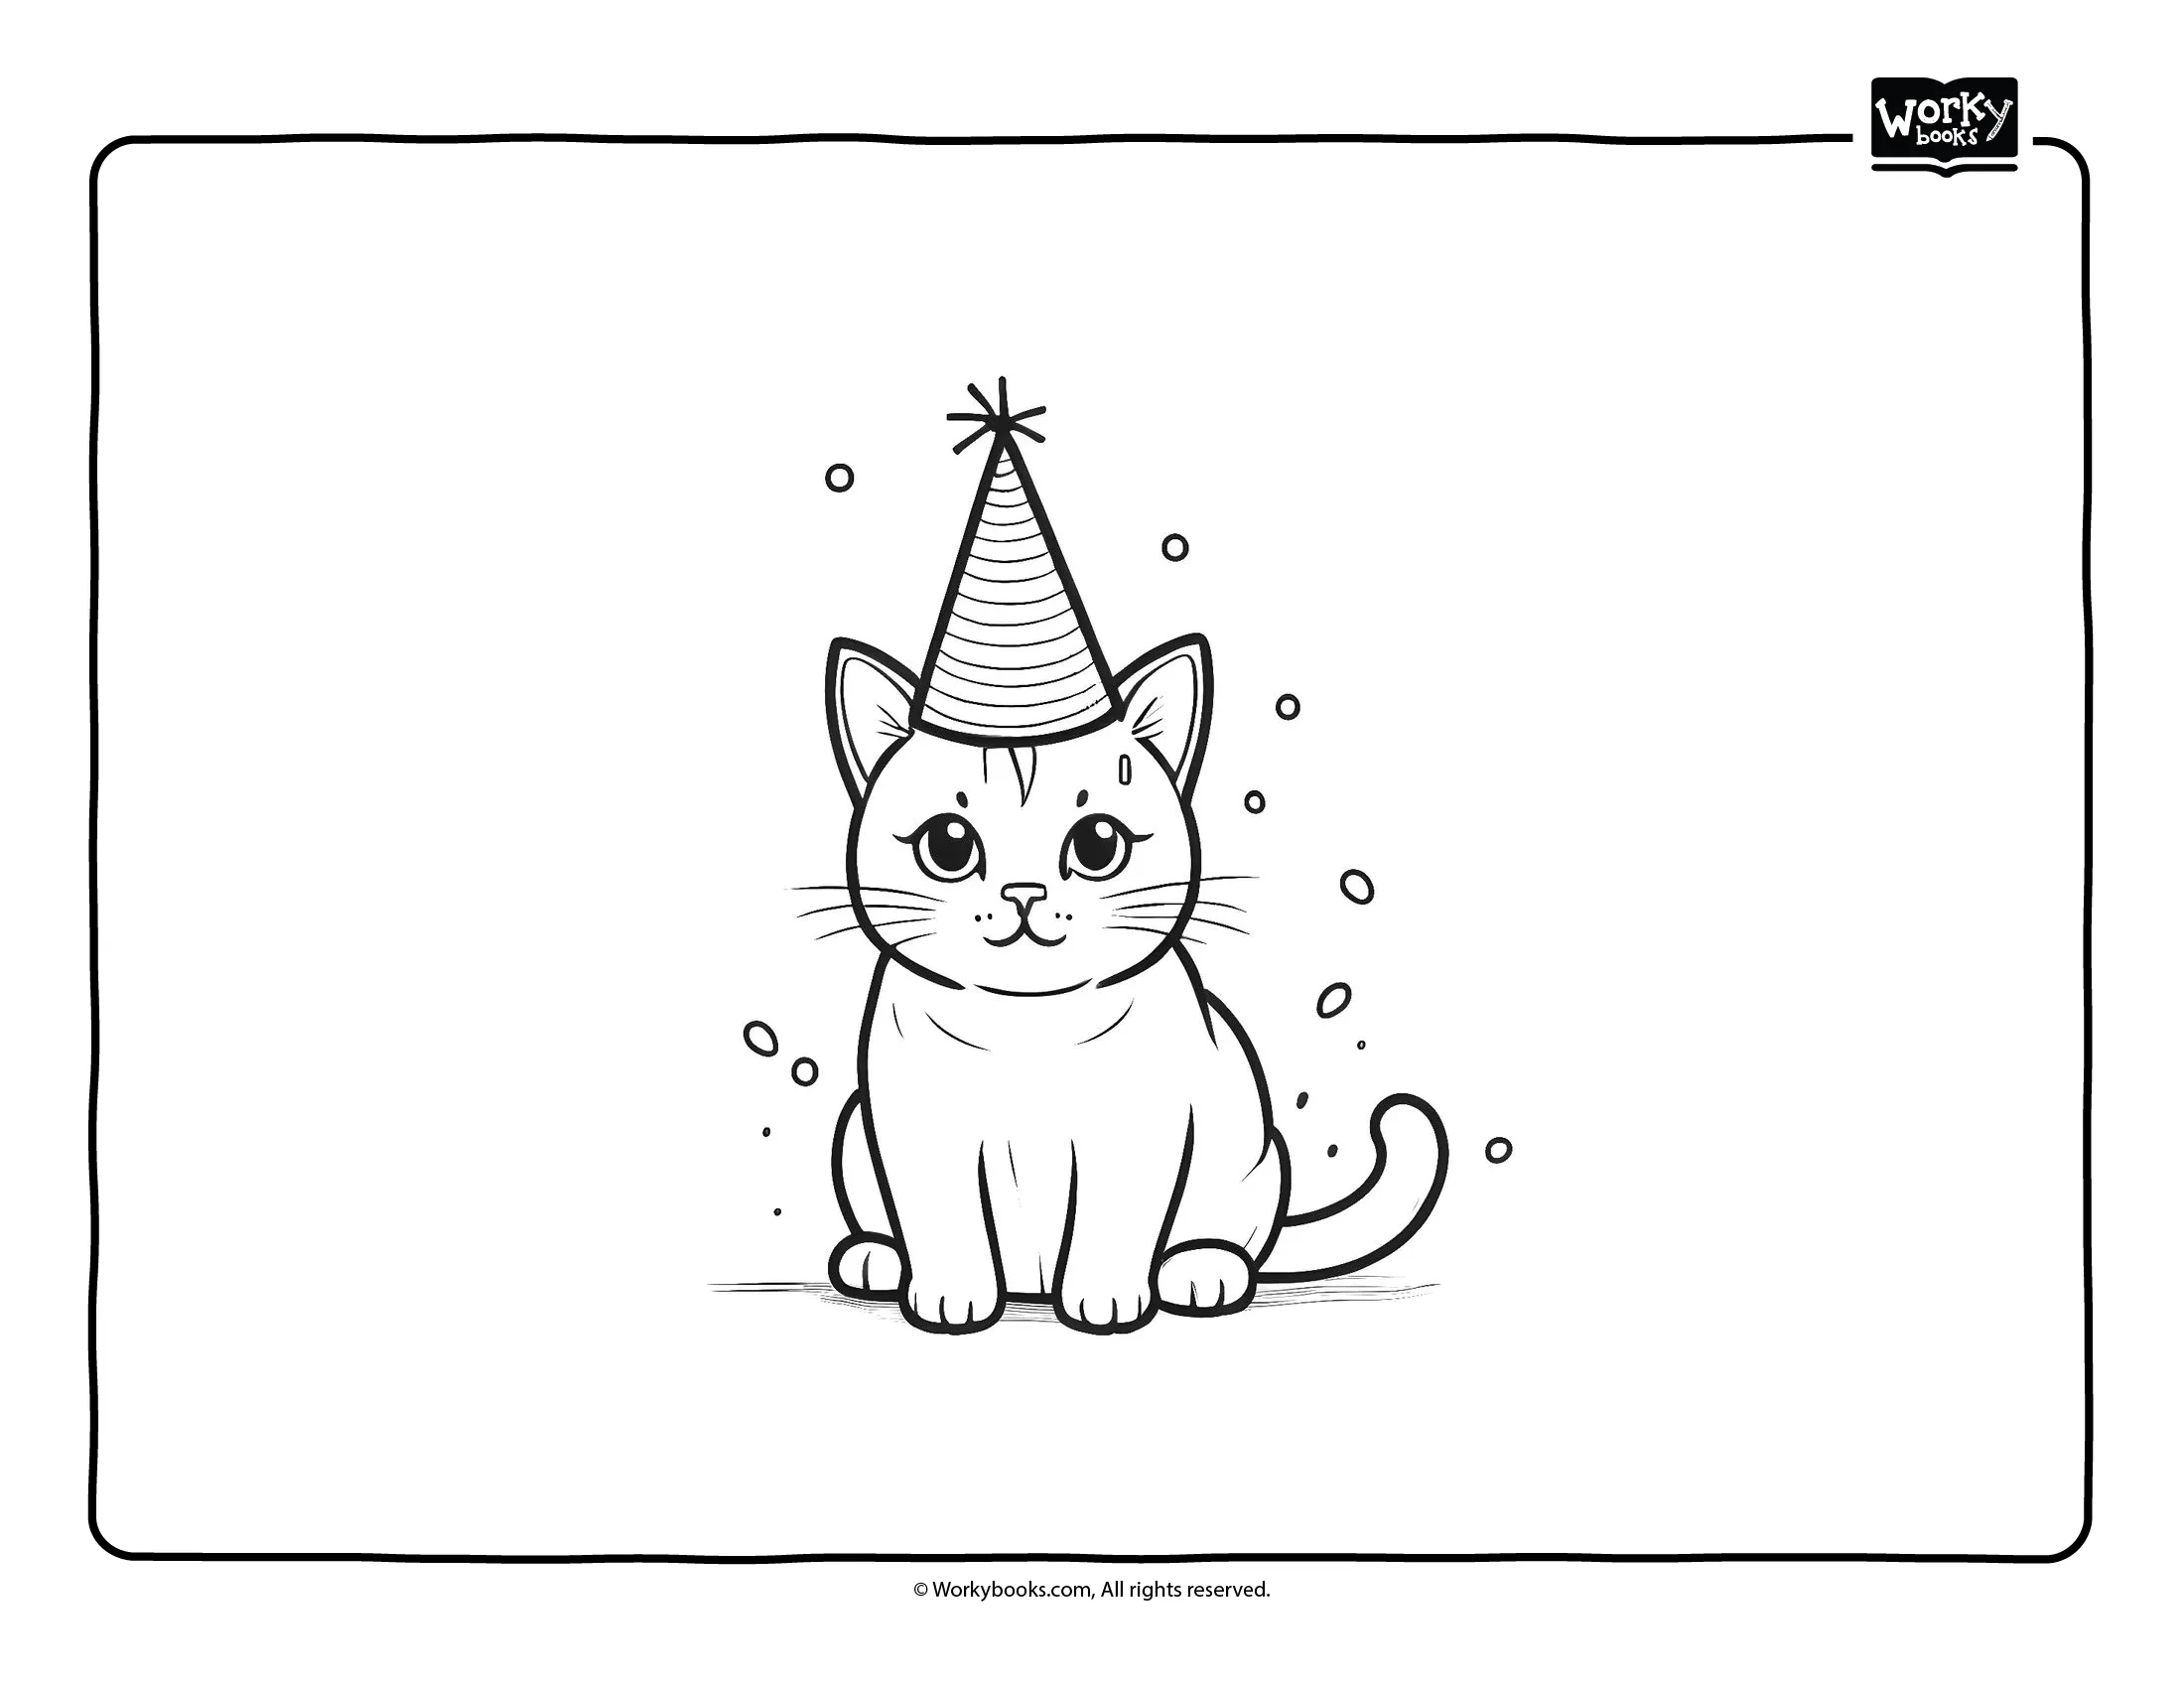 cat with party hat coloring page